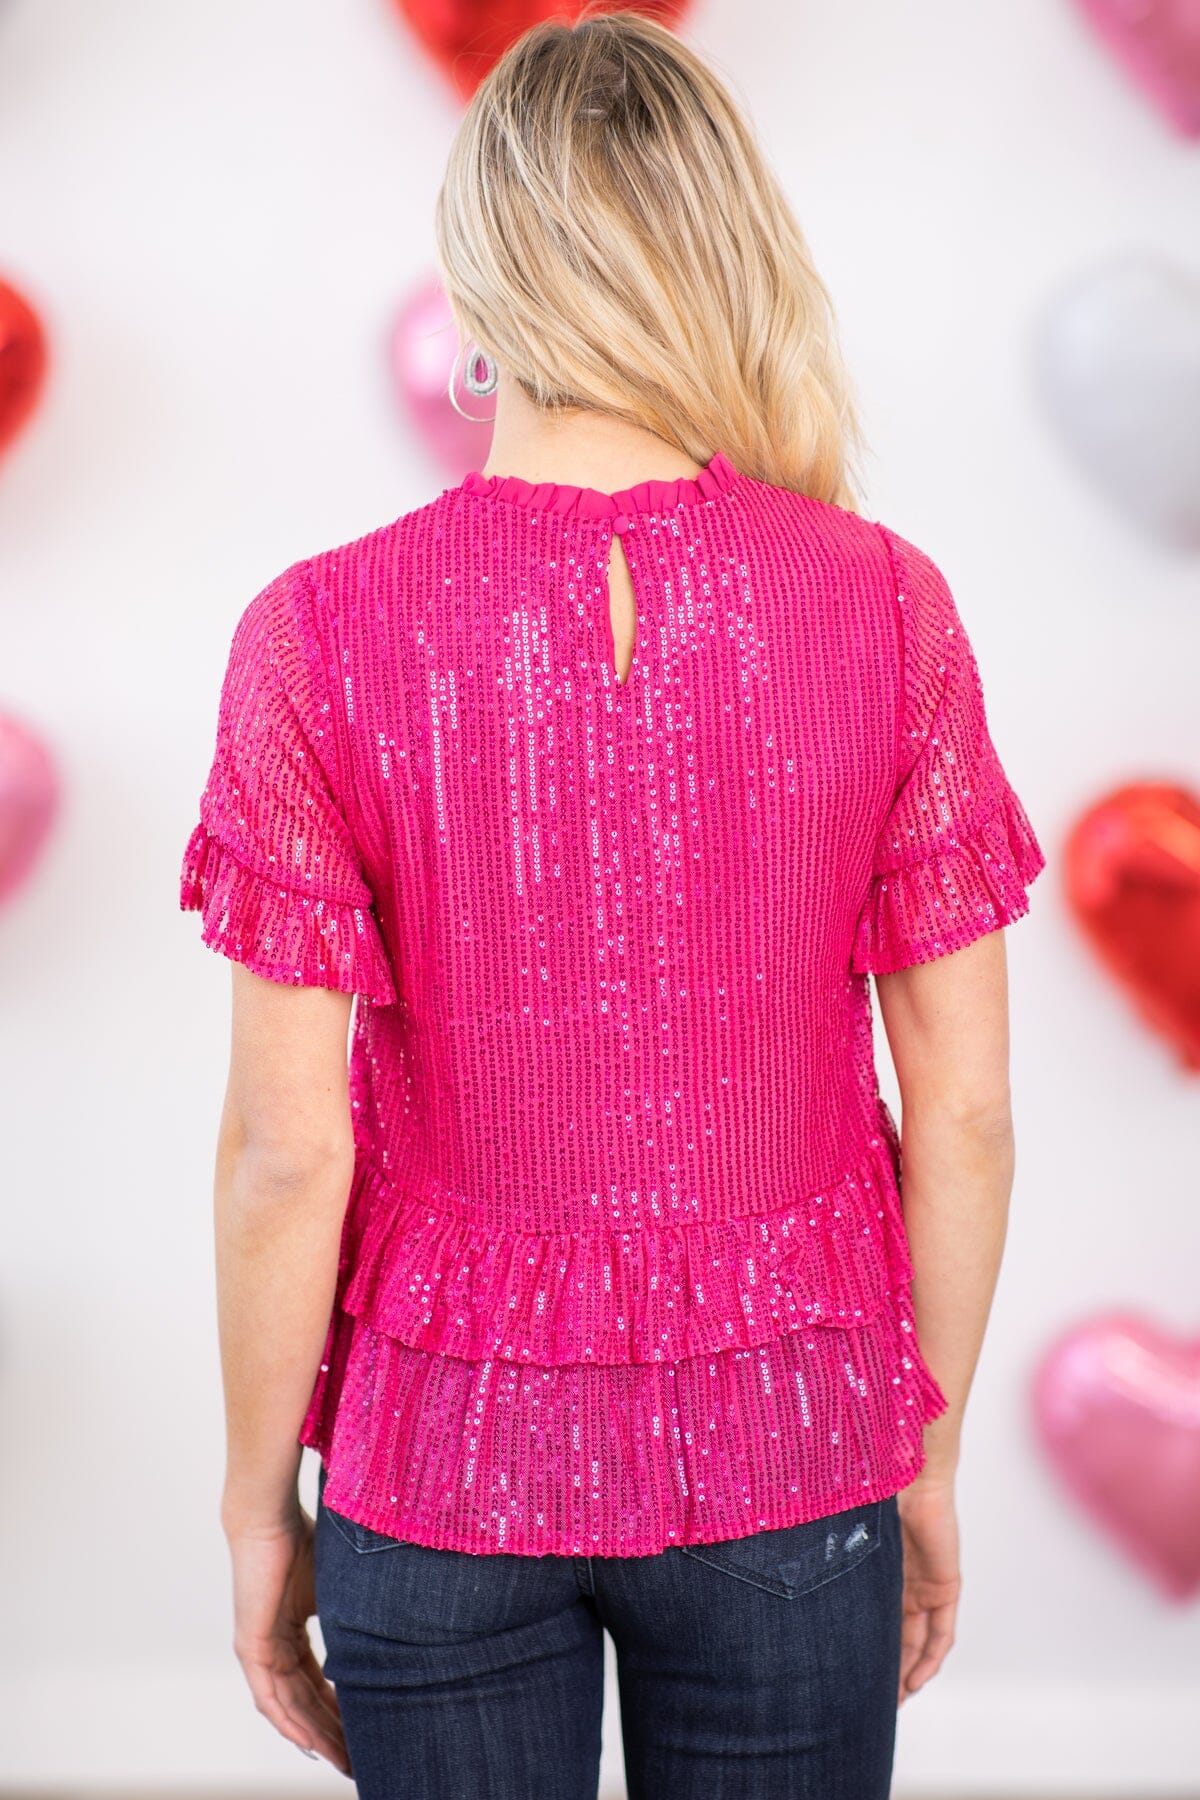 Hot Pink Ruffle Trim Sequin Top - Filly Flair